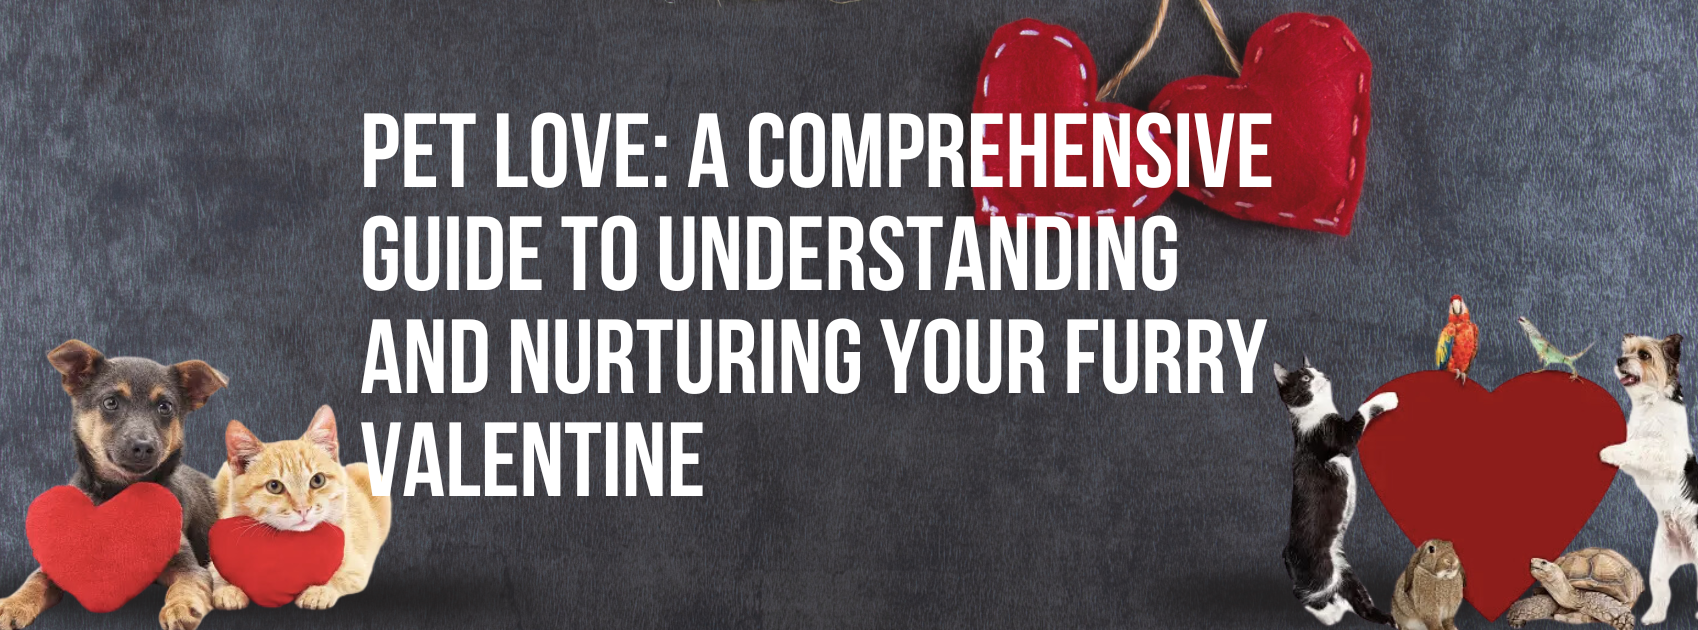 Pet Love: A Comprehensive Guide to Understanding and Nurturing Your Furry Valentine